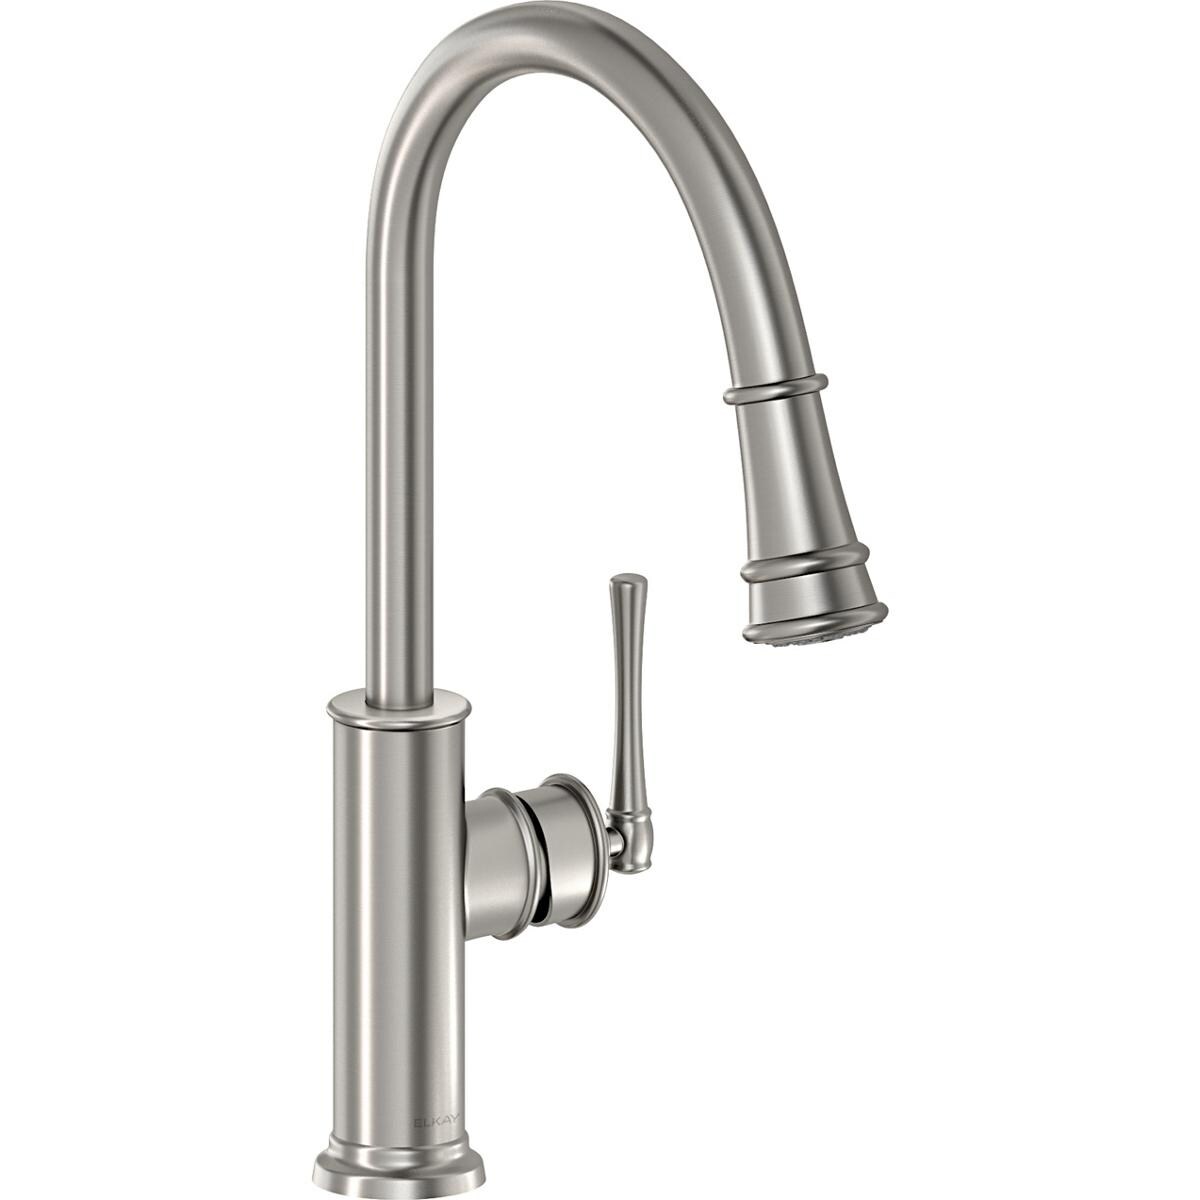 Beyond 30349532 Handle Pull-down Faucet Kitchen Explore Bed Elkay Spray Bath - Only Single Lever & Hole - Forward with and